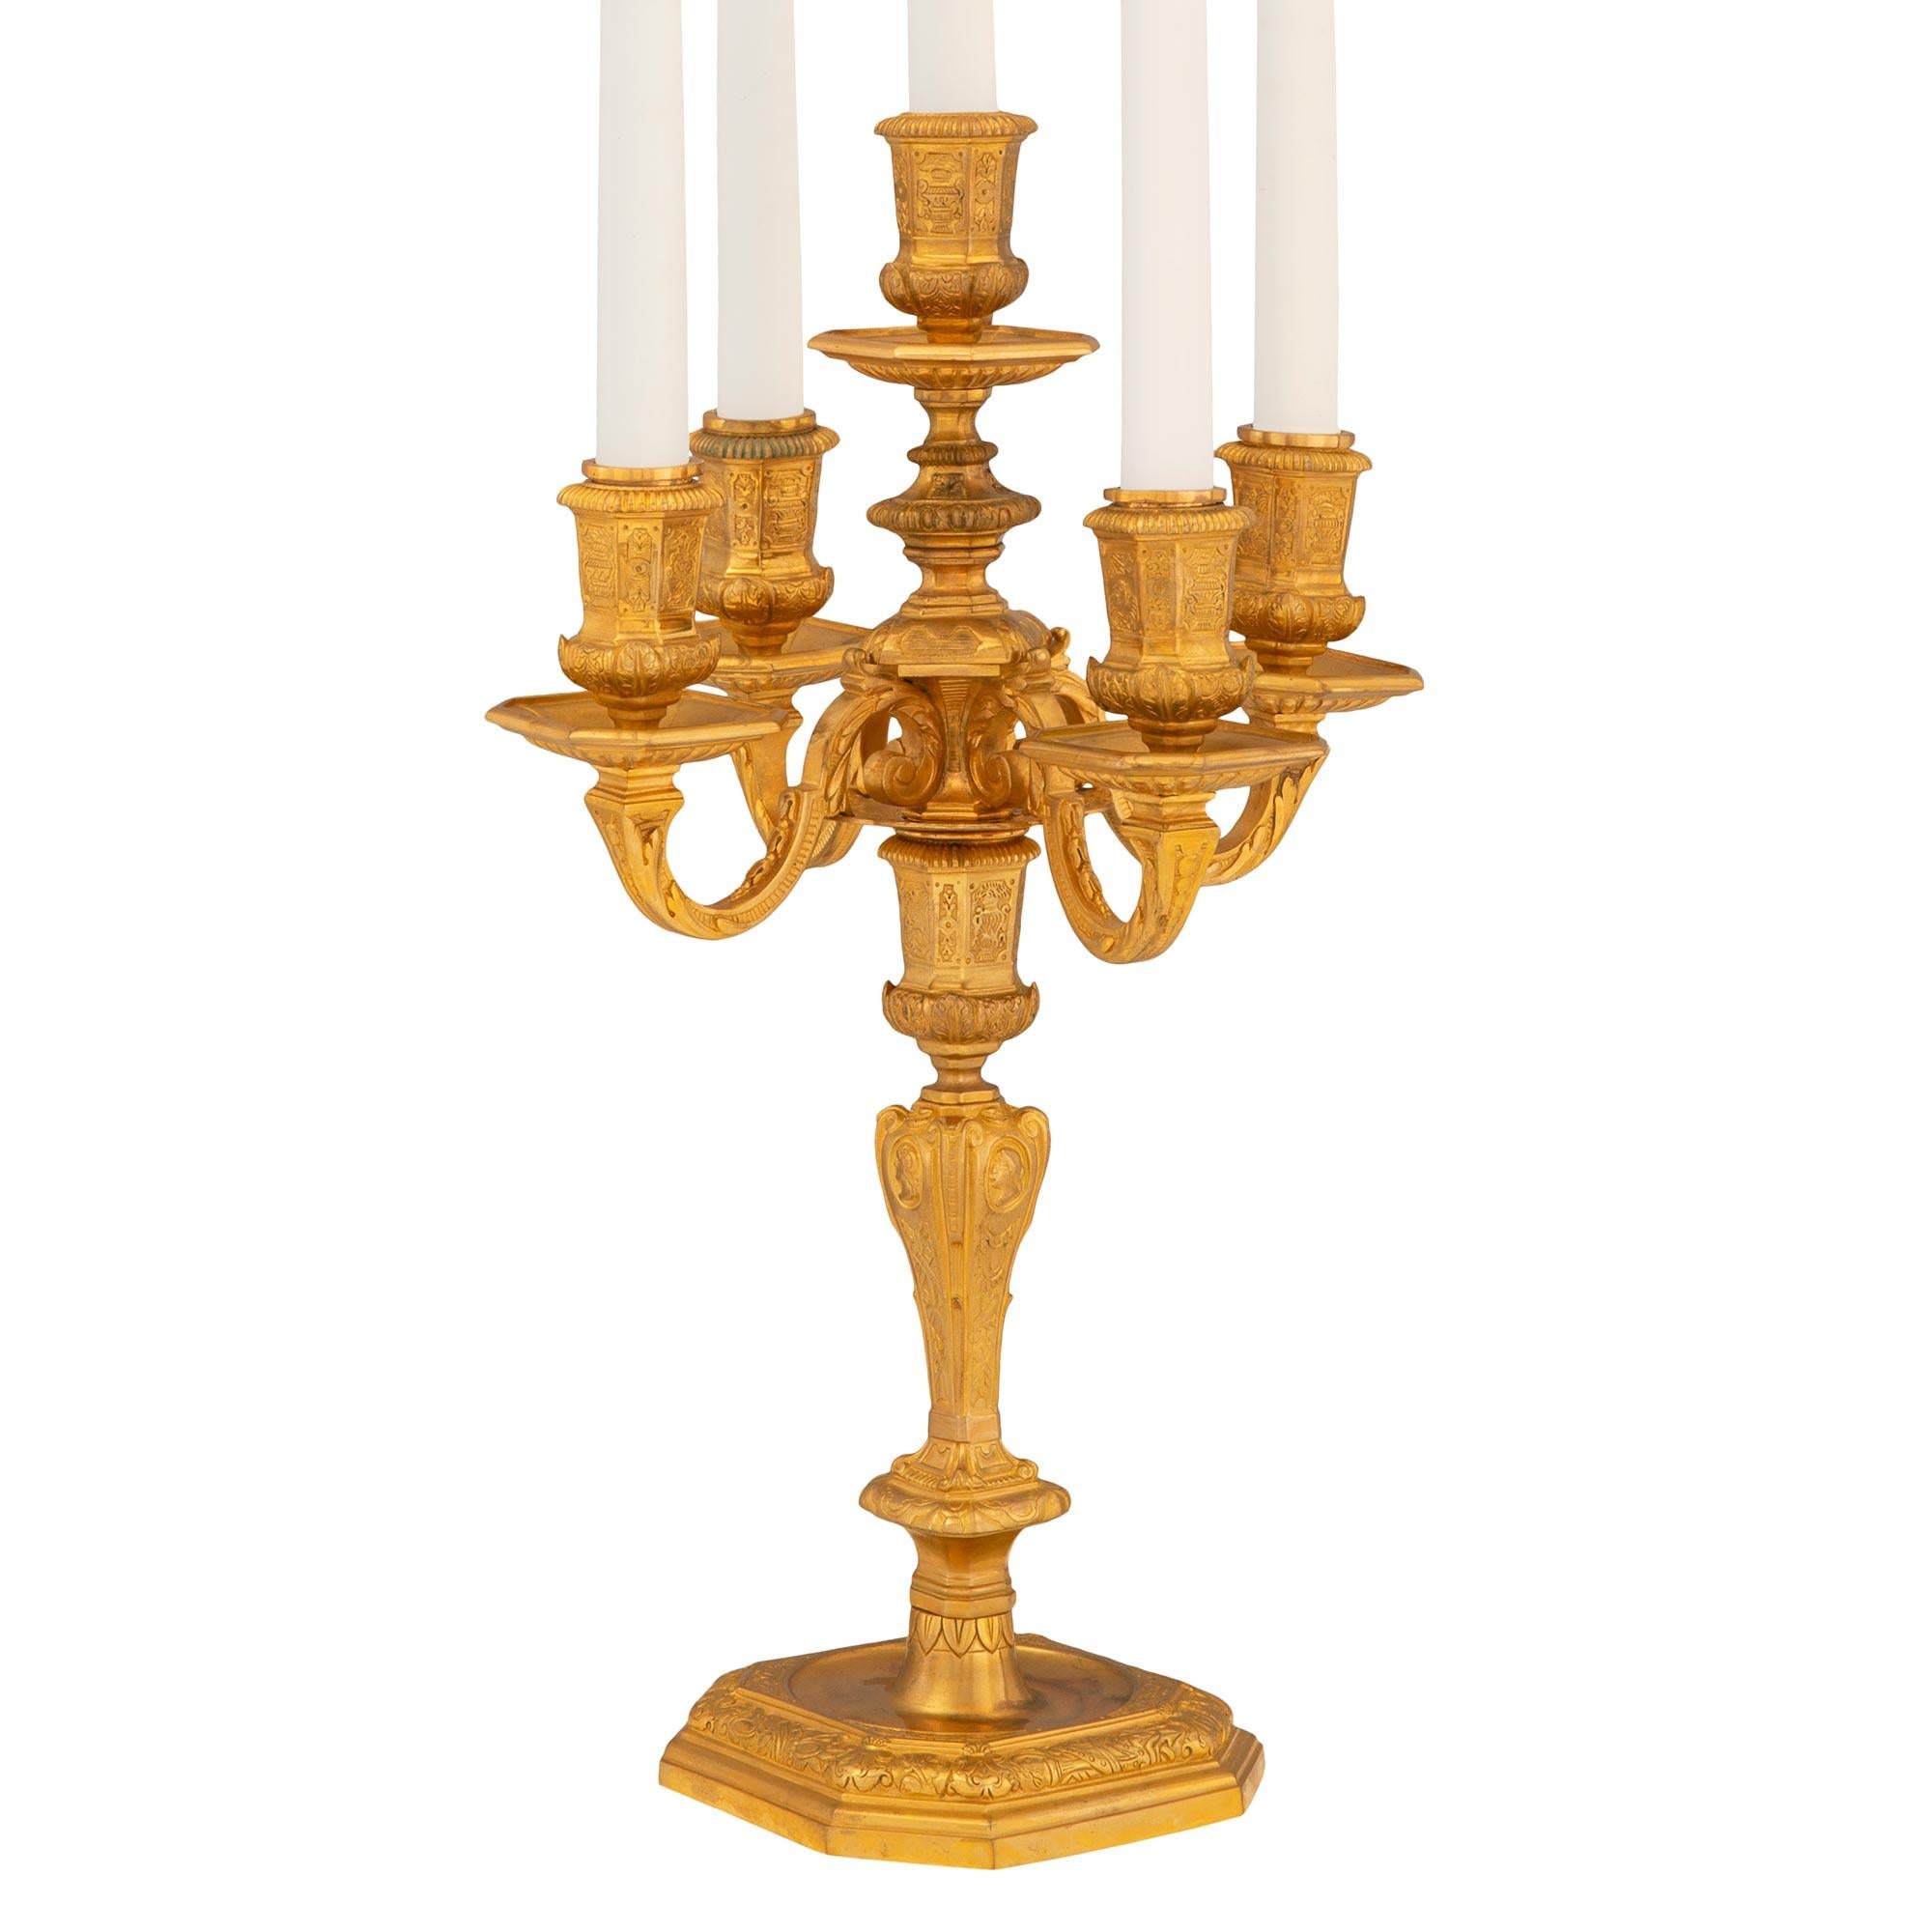 An elegant and high quality pair of French 19th century Louis XIV st. ormolu candelabras. Each five arm candelabra is raised on a square base with lovely cut corners and a richly chased mottled wrap around foliate band. The beautiful baluster shaped